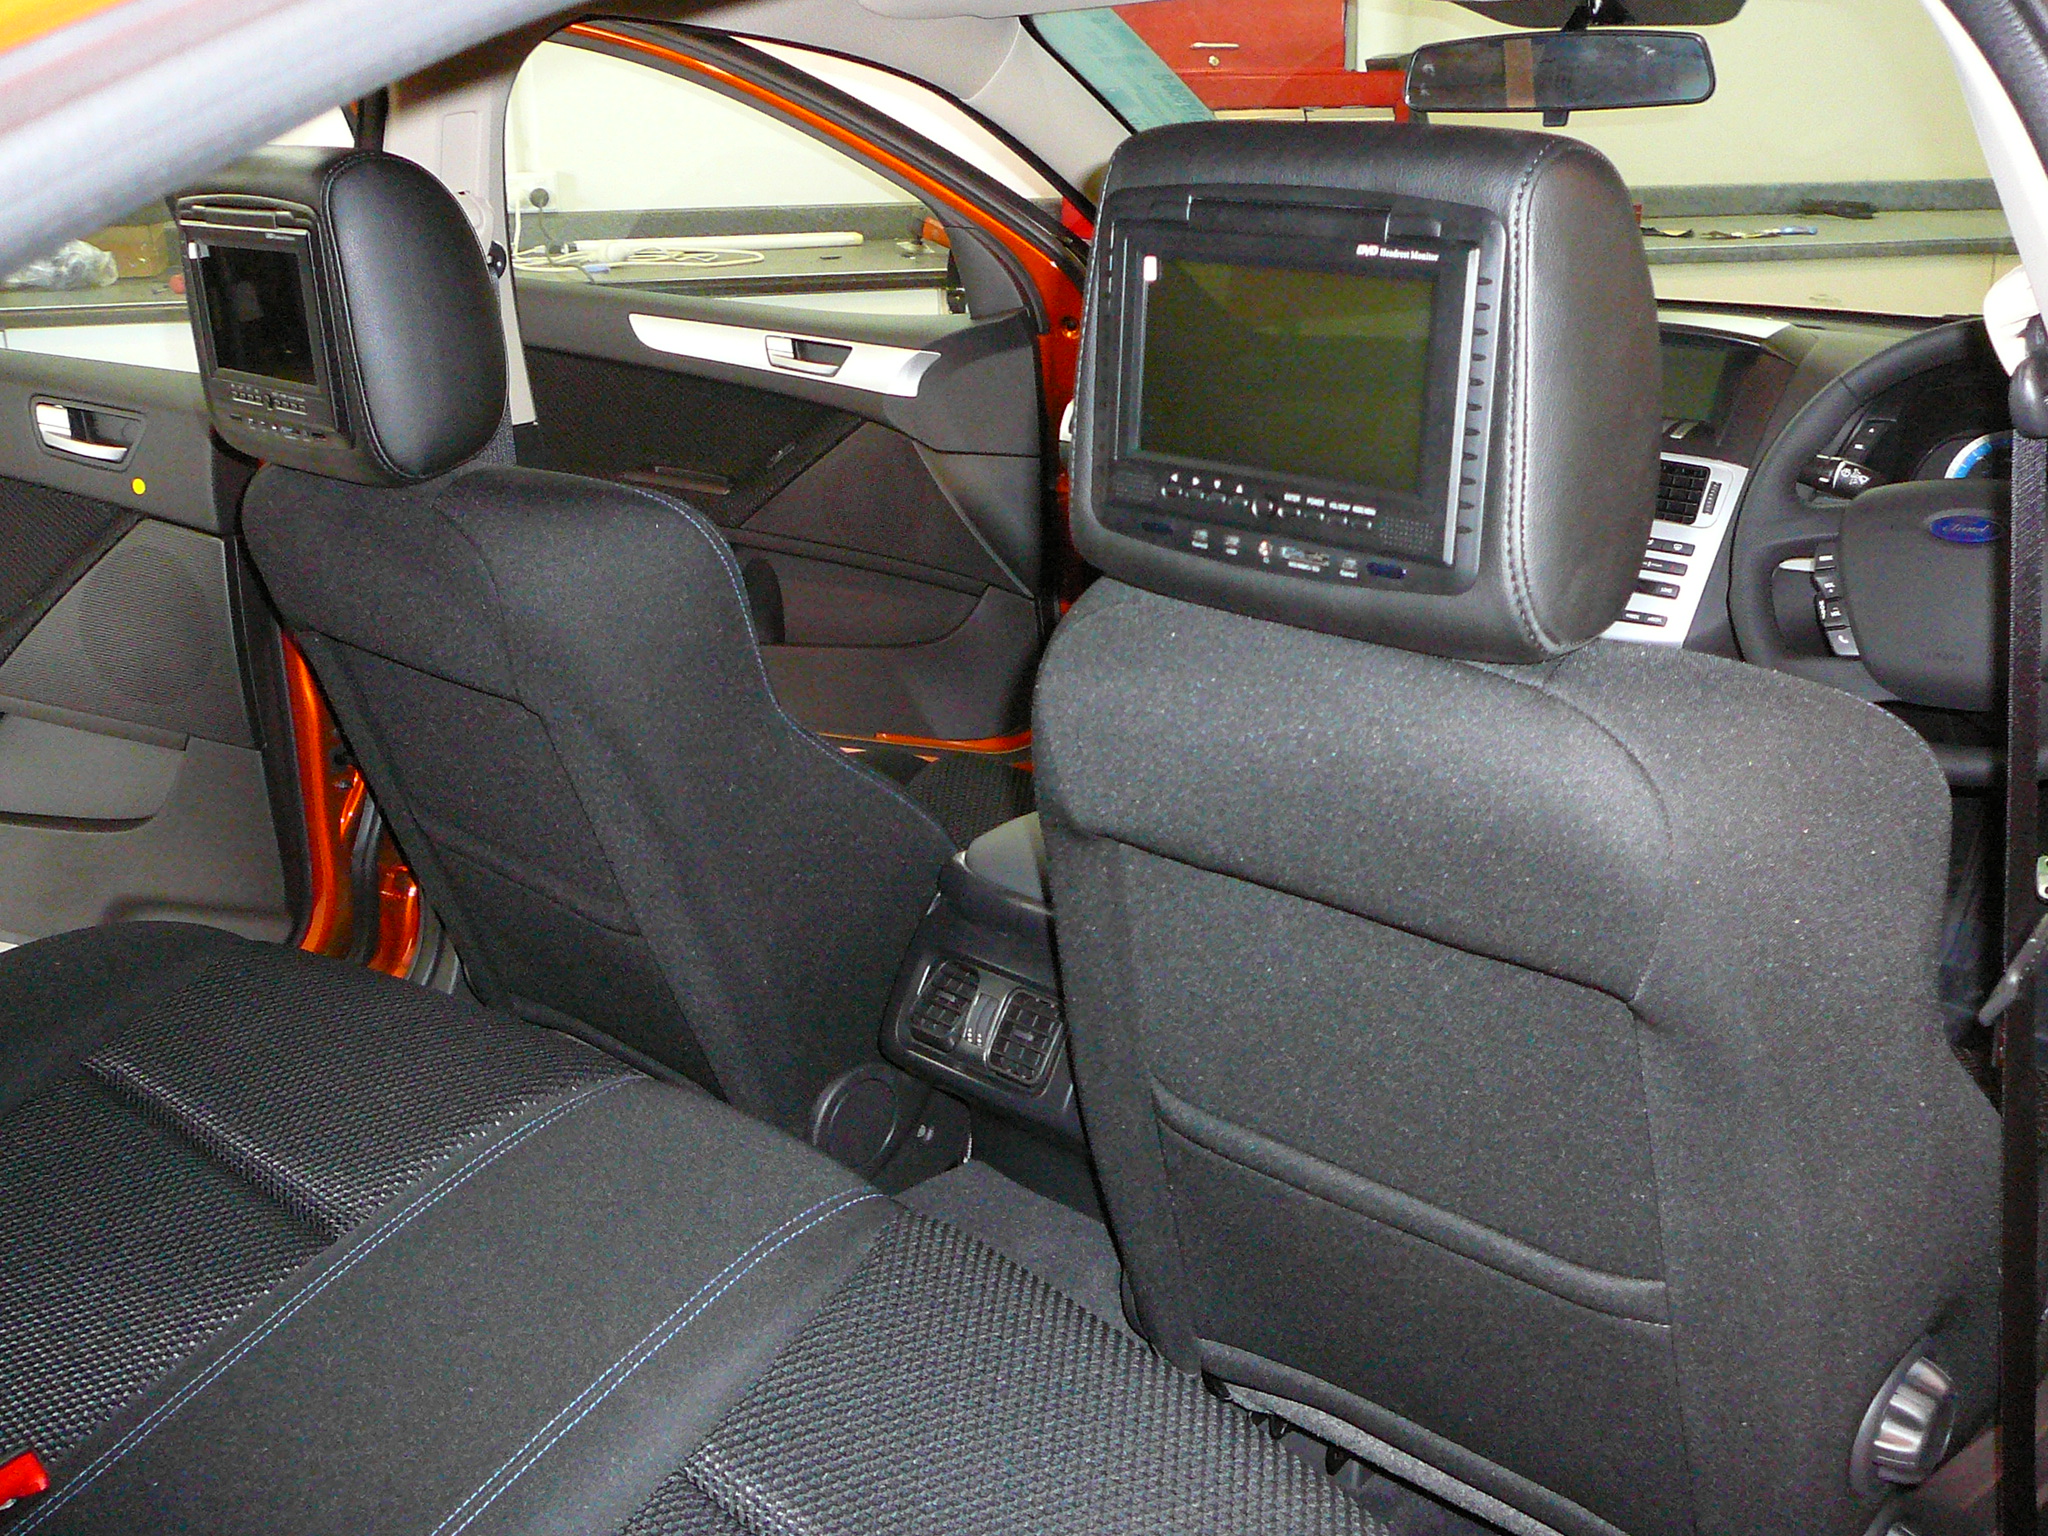 Ford Falcon XR6 2011 with Mongoose rear seat DVD screens